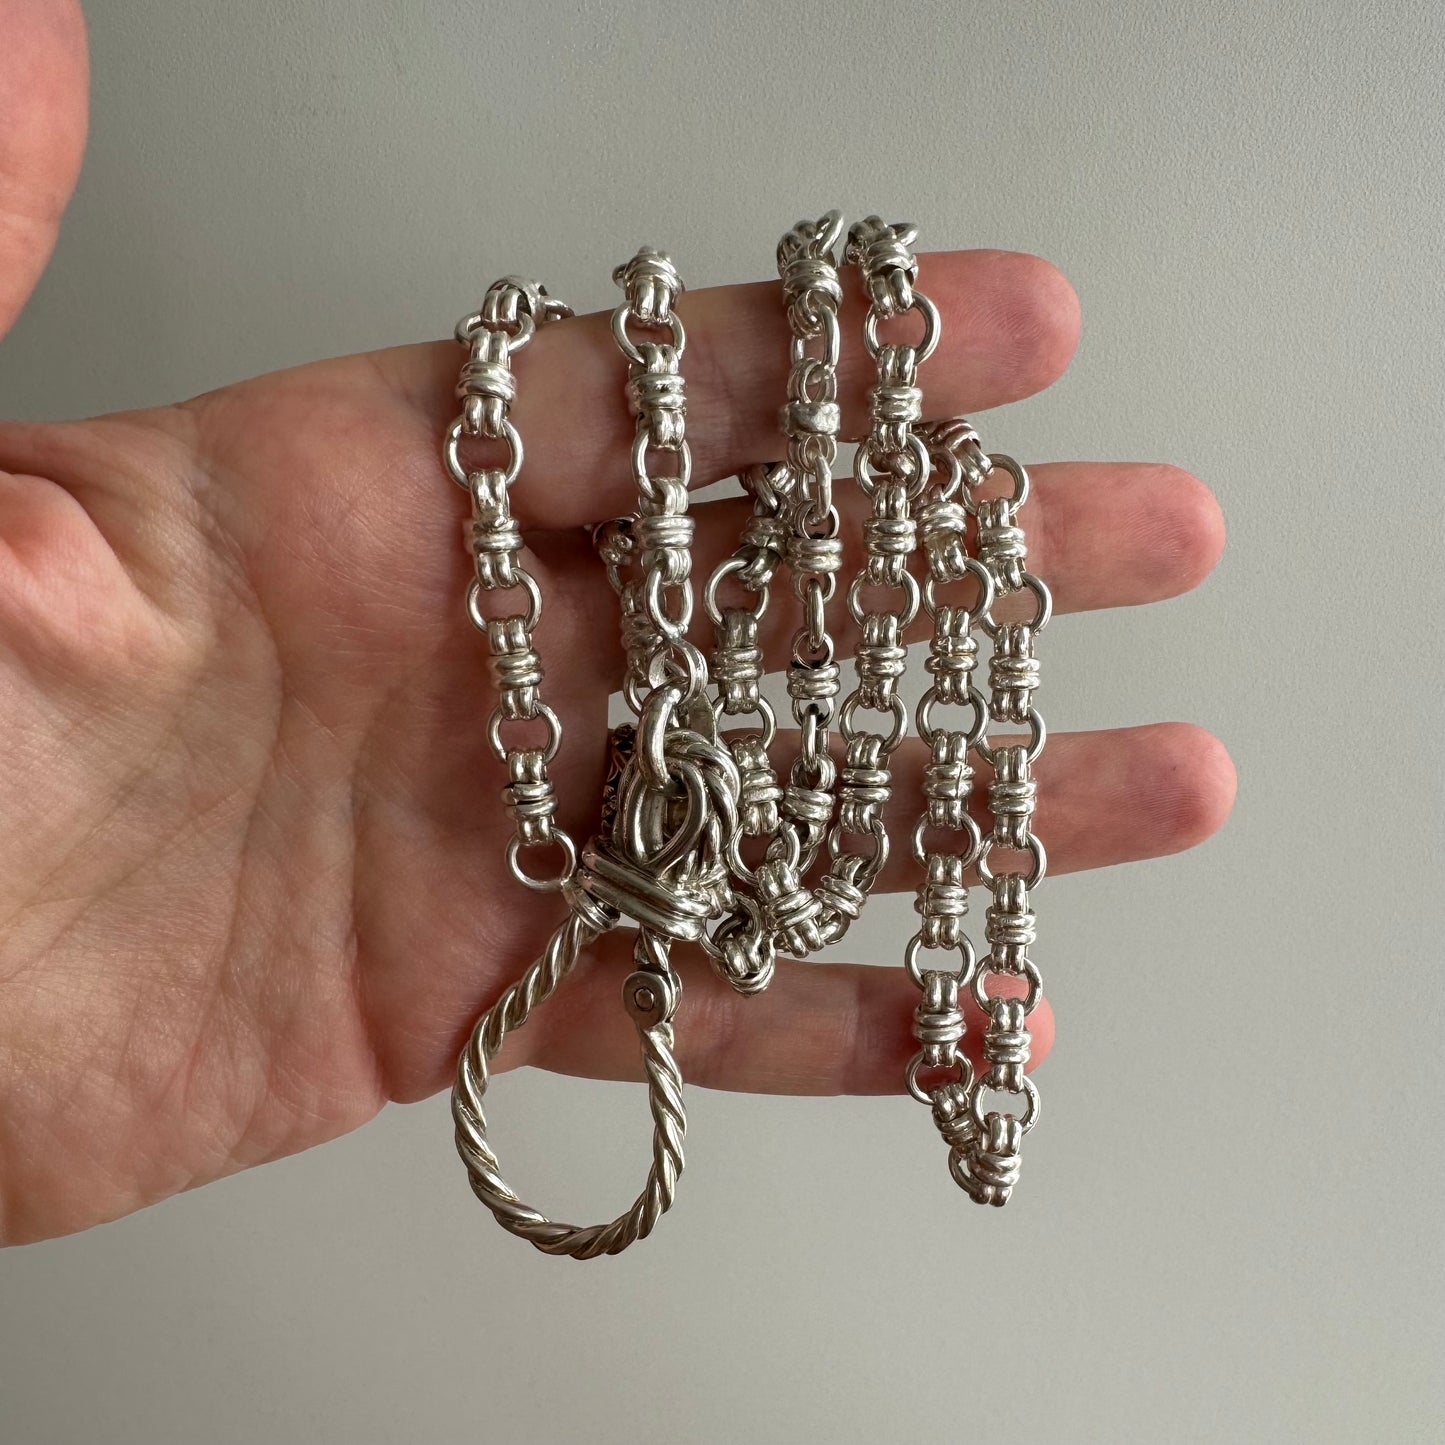 reimagined V I N T A G E // twisted connector / sterling silver fancy link chain with twisted carabiner pendant holder / ~26", 45g